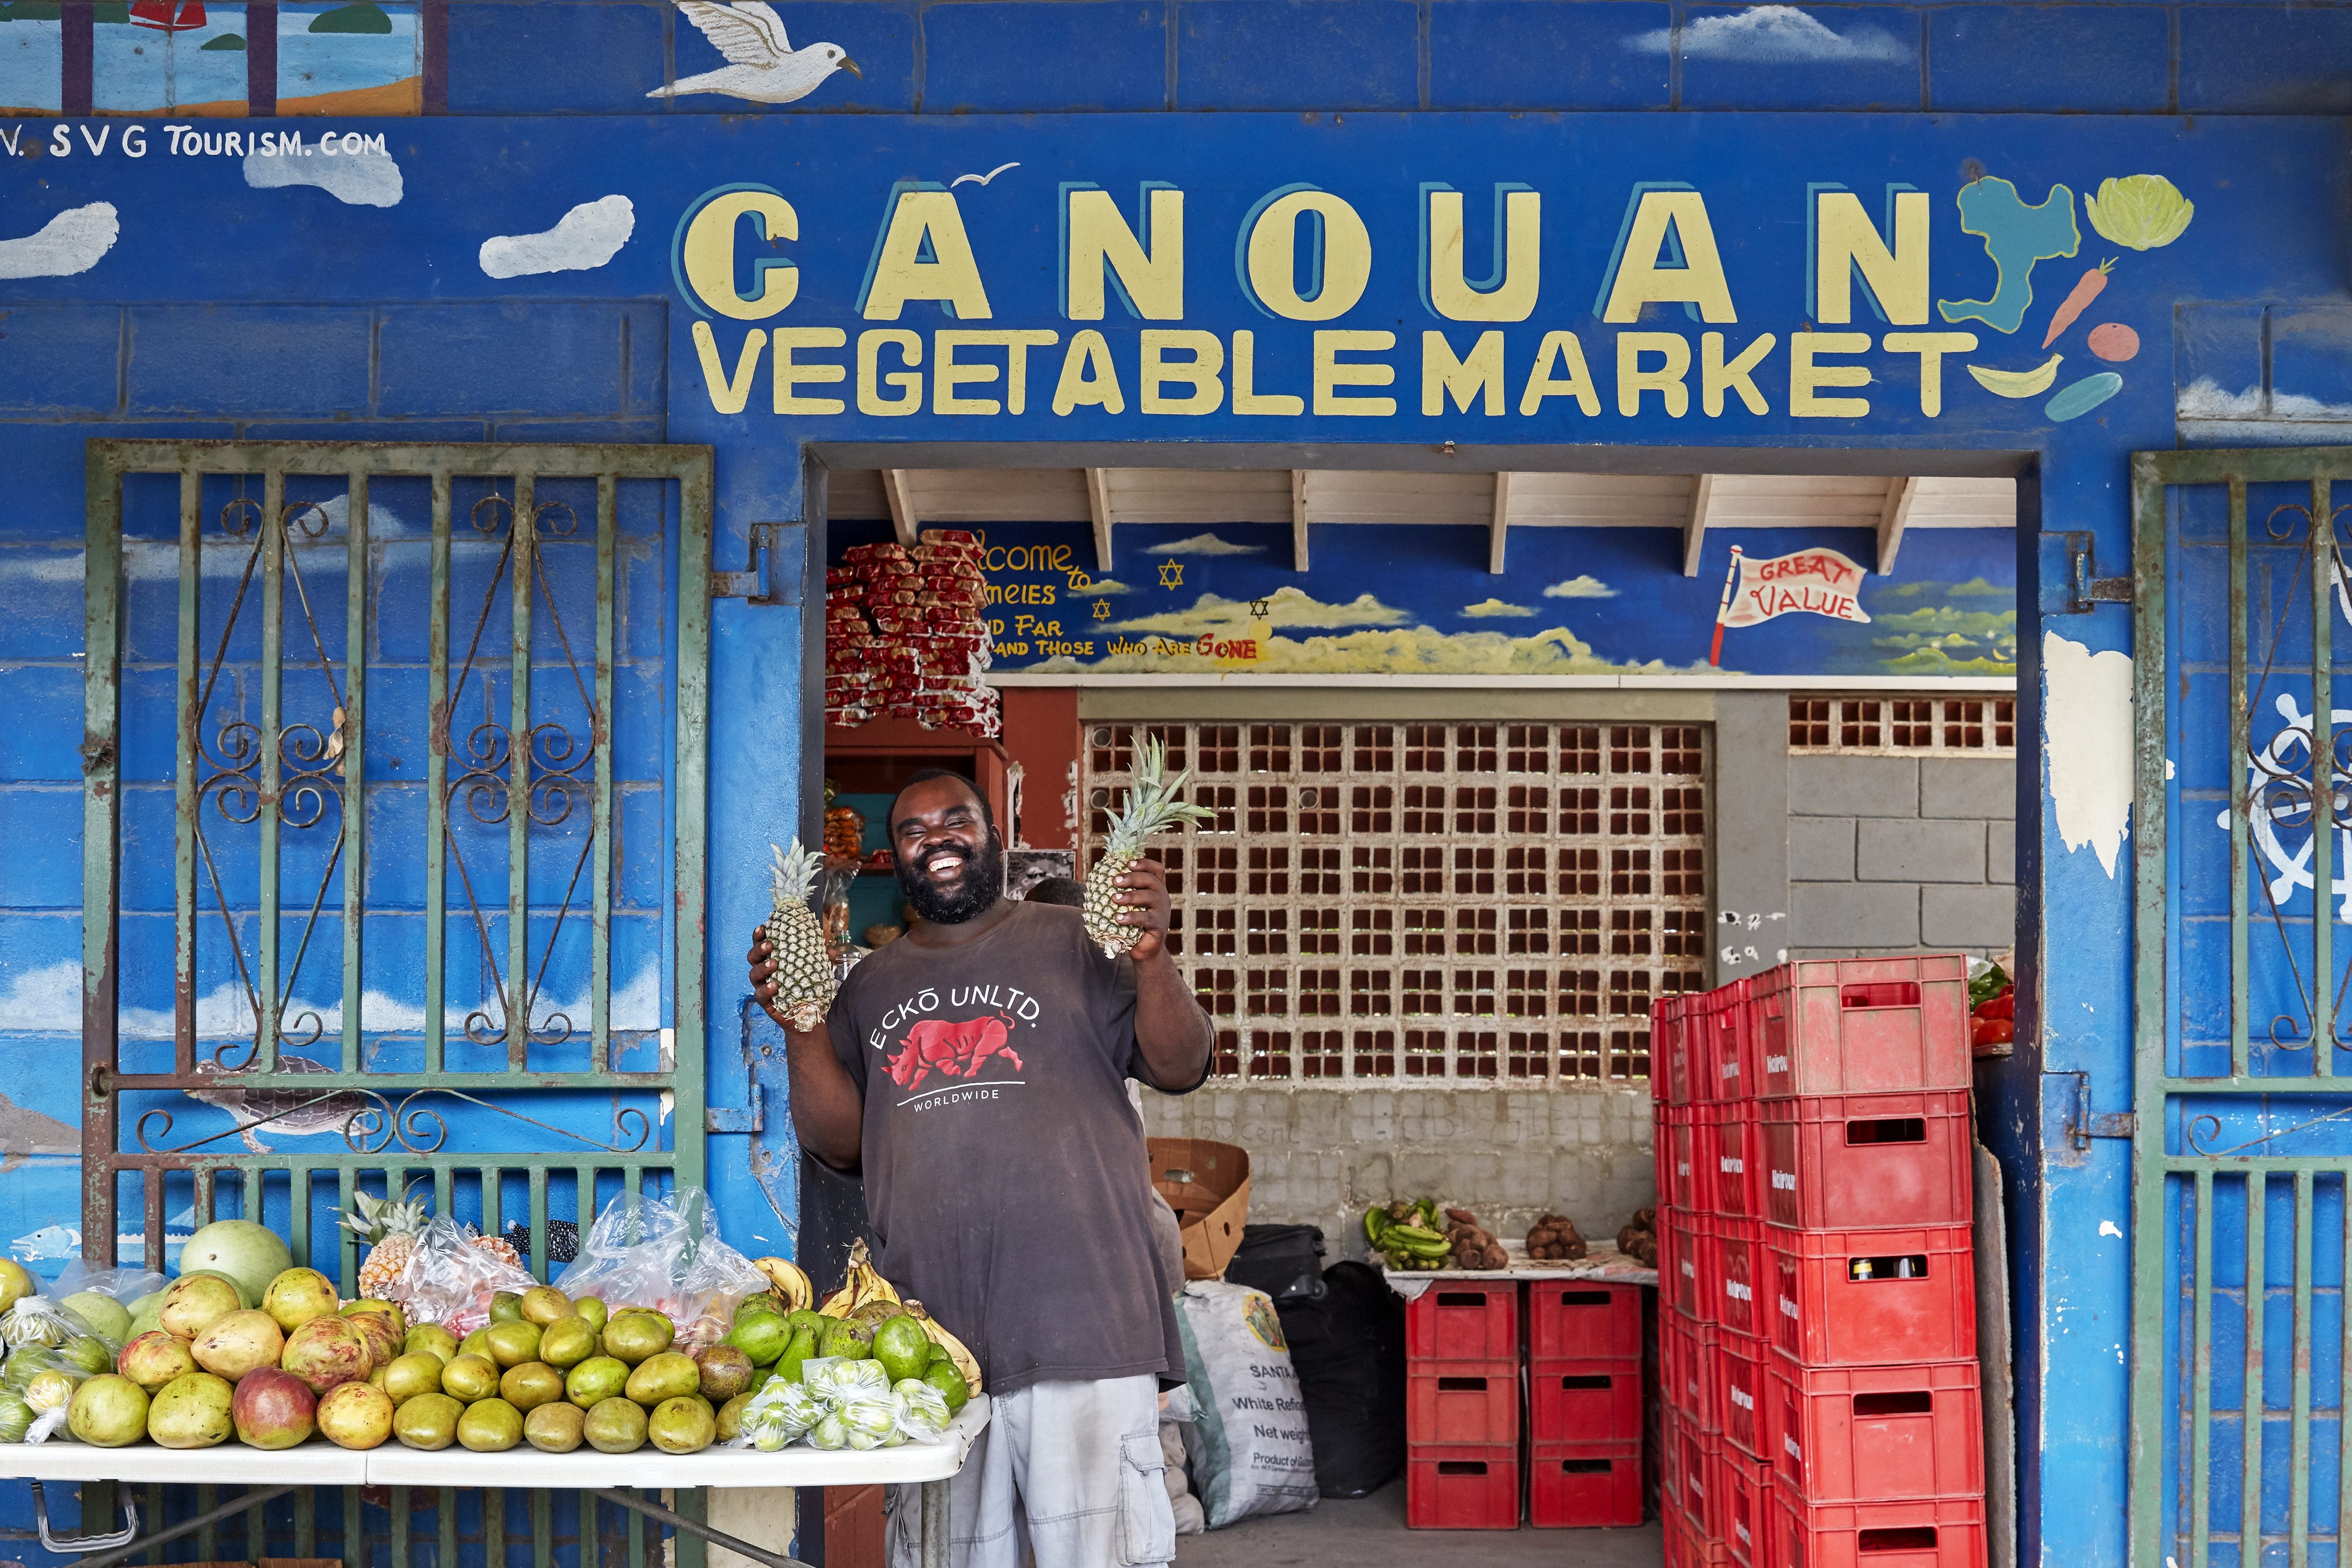 Man standing in front of a bright blue store called Canouan Vegetable Market, with a table of fruit in front of him